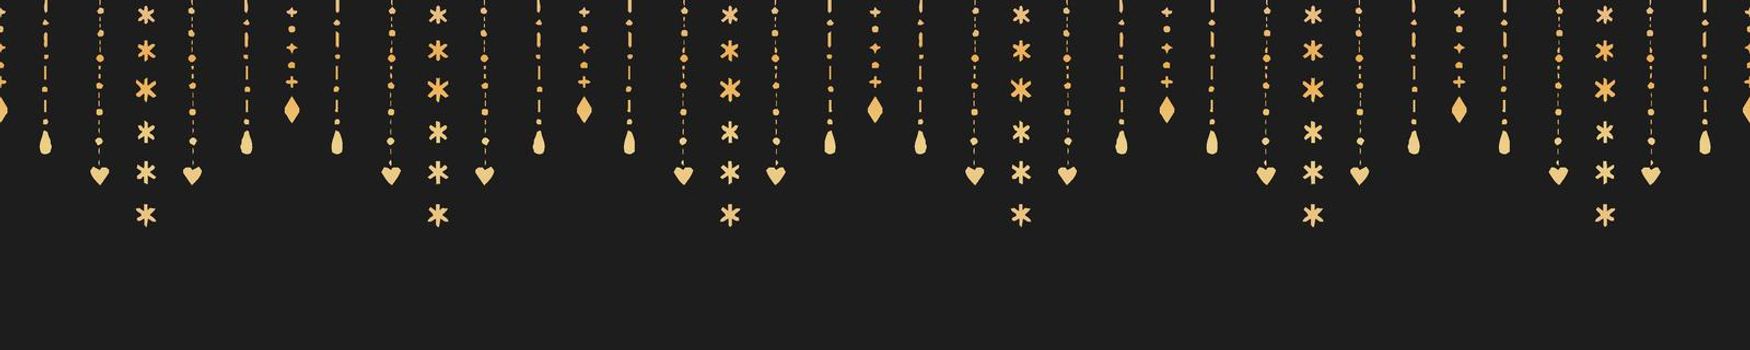 garland with different gold beads hand drawn festive seamless border pattern in trendy luxury style